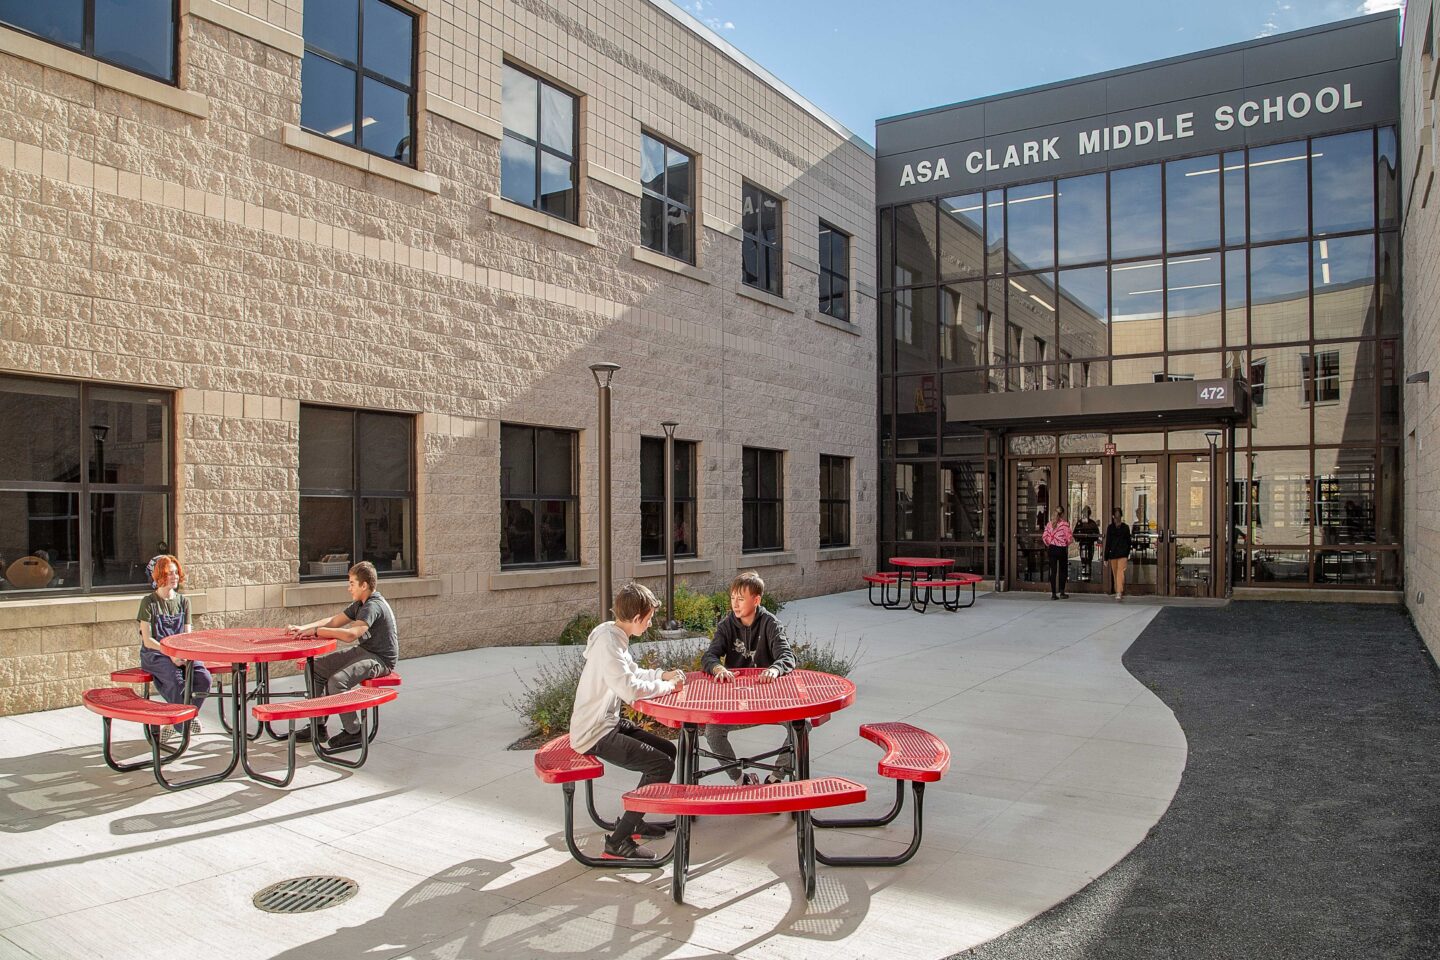 Students at red cafeteria tables eat and talk in an outdoor courtyard at Asa Clark Middle School